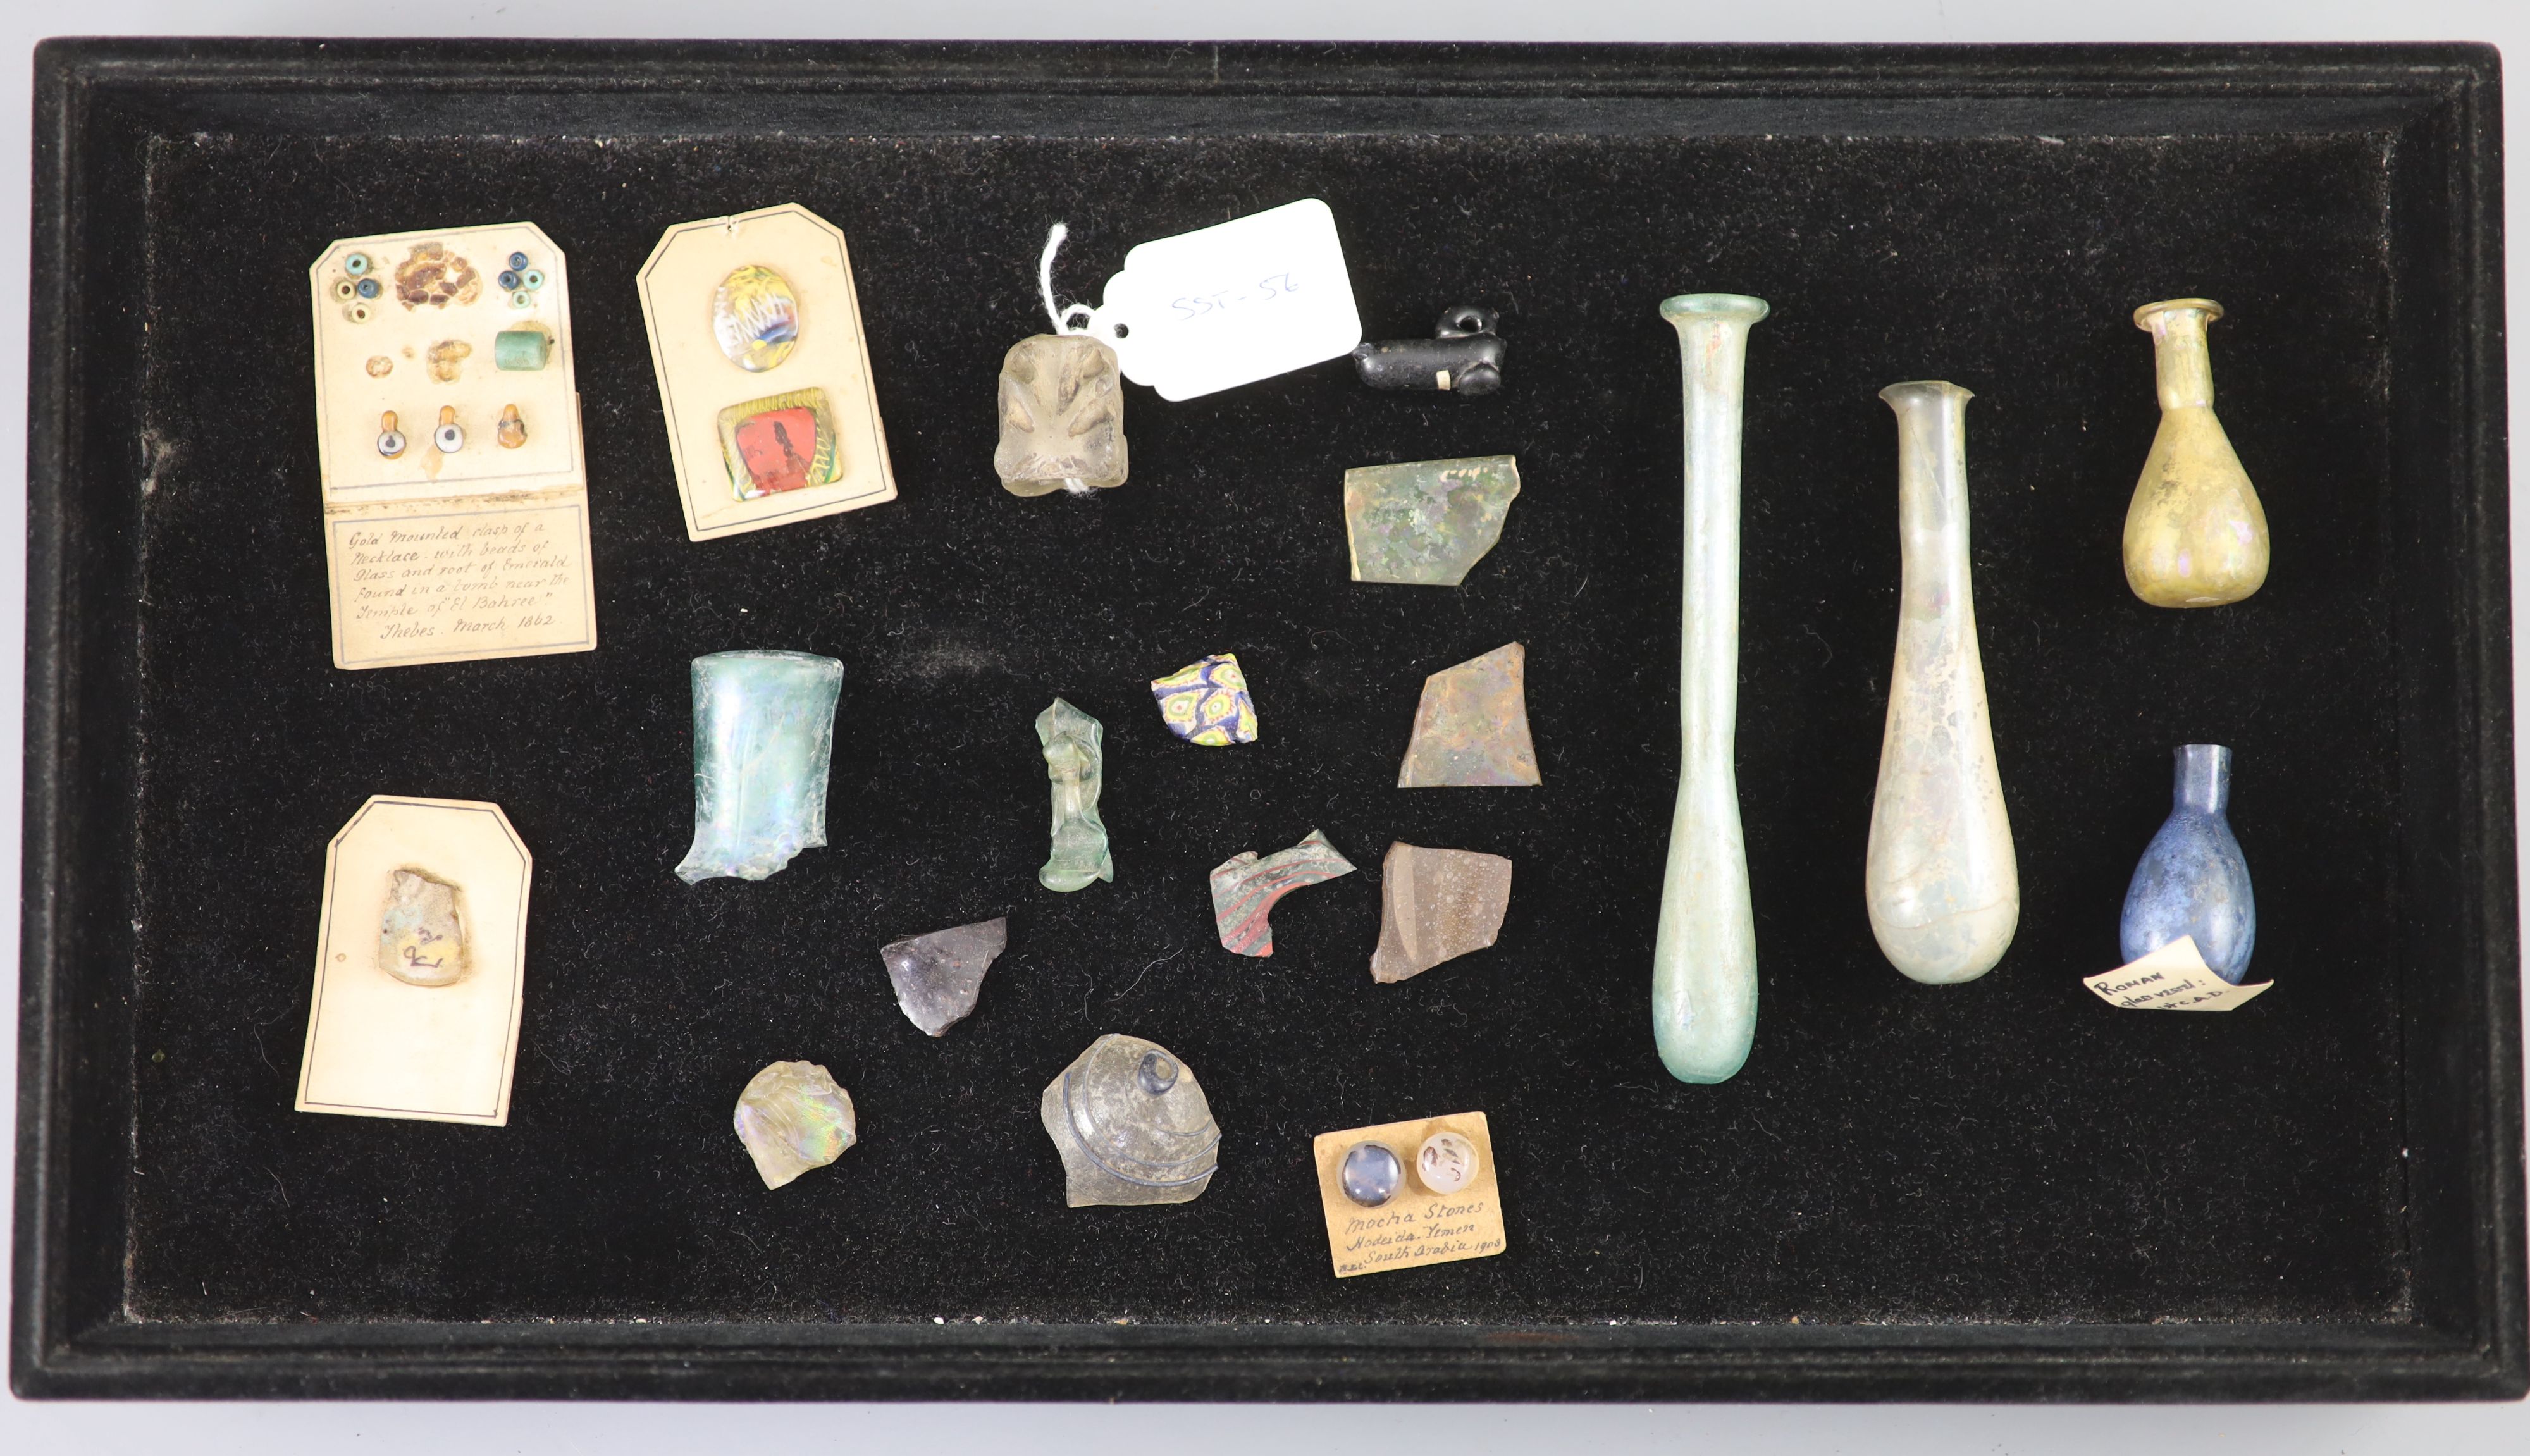 A group of three Roman glass vessels and Egyptian/Roman glass fragments, Provenance - A. T. Arber-Cooke